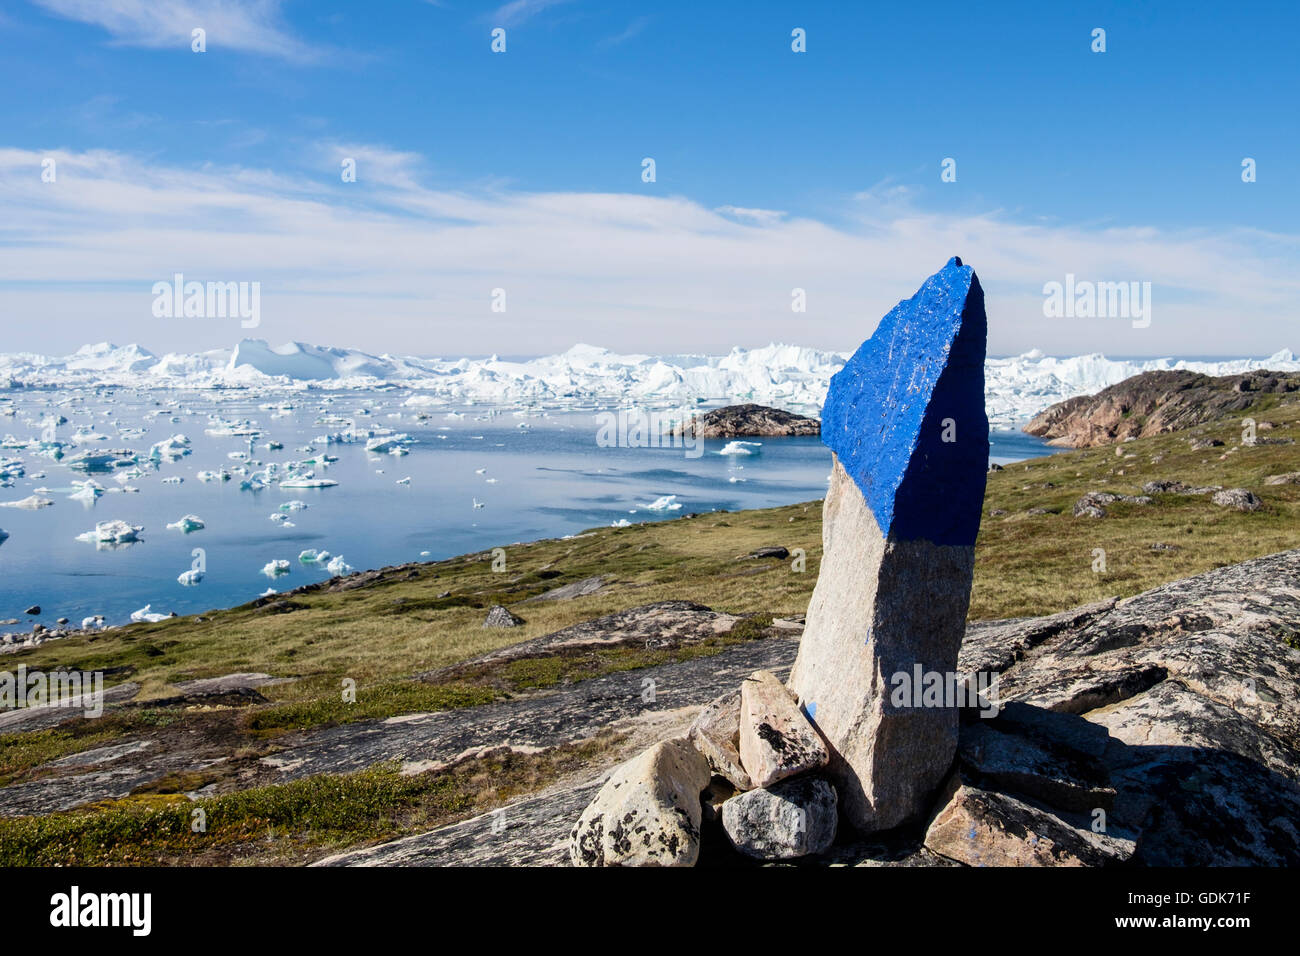 Painted stone cairn marking blue trail beside Ilulissat Icefjord with icebergs in fjord in summer. Ilulissat Western Greenland Stock Photo